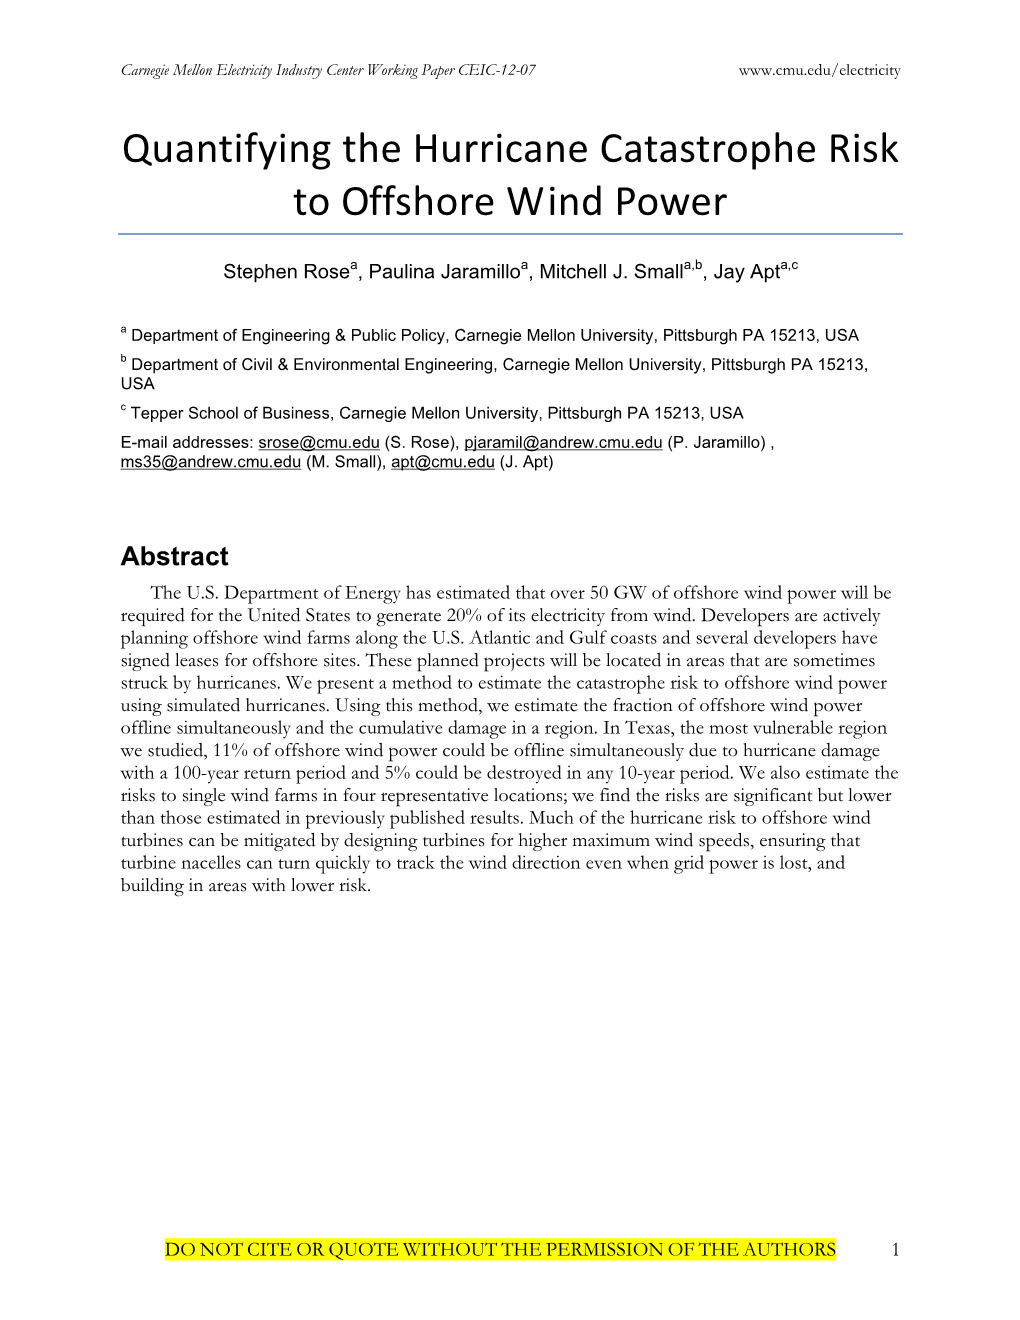 Quantifying the Hurricane Catastrophe Risk to Offshore Wind Power